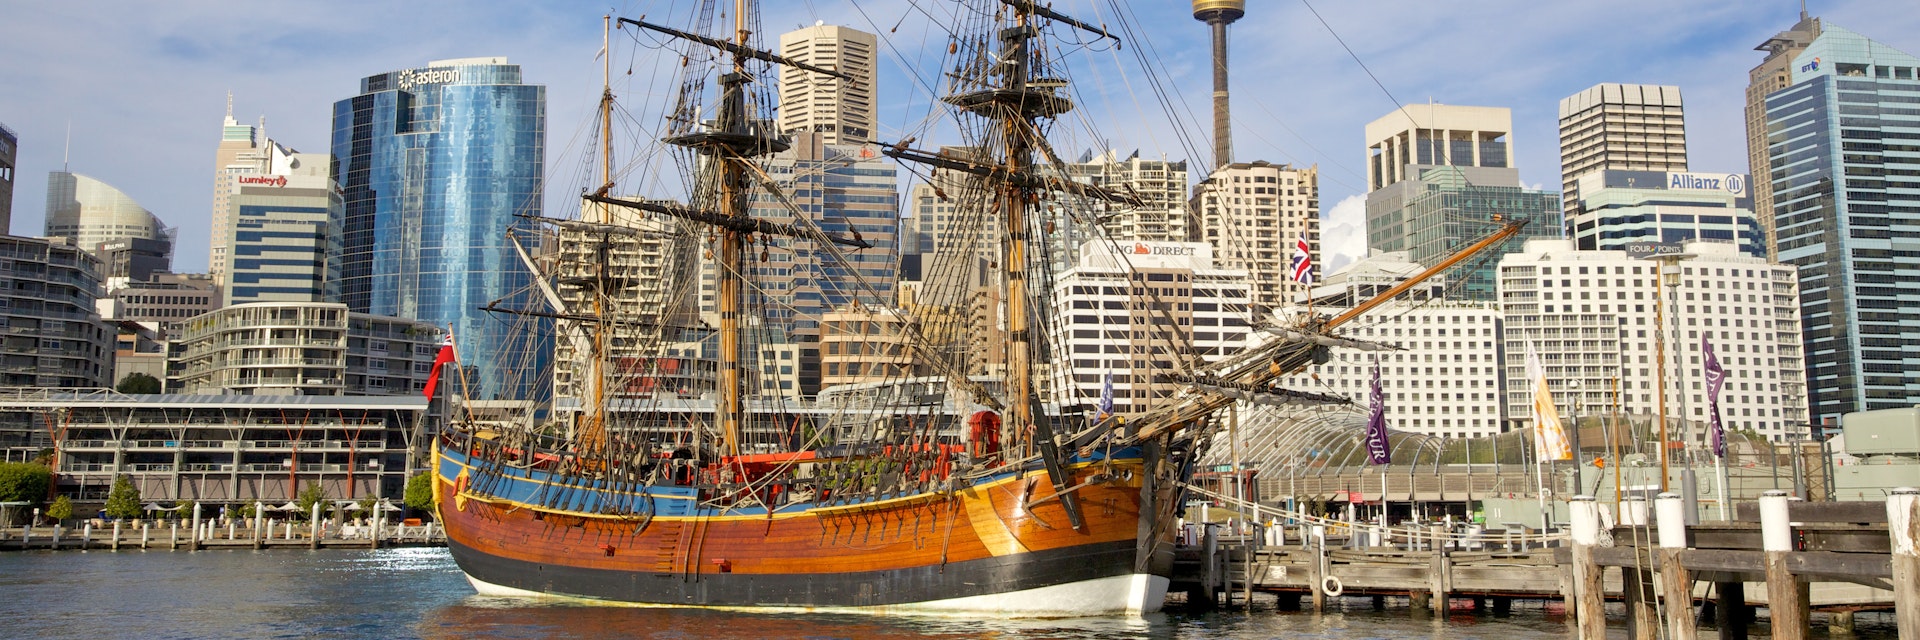 SYDNEY, AUSTRALIA - MAY 20, 2010: A splendid replica of James Cook's HMS Endeavour, moored alongside the Australian National Maritime Museum in Darling Harbour, Sydney. ; Shutterstock ID 203274241; Your name (First / Last): Josh Vogel; Project no. or GL code: 56530; Network activity no. or Cost Centre: Online-Design; Product or Project: 65050/7529/Josh Vogel/LP.com Destination Galleries